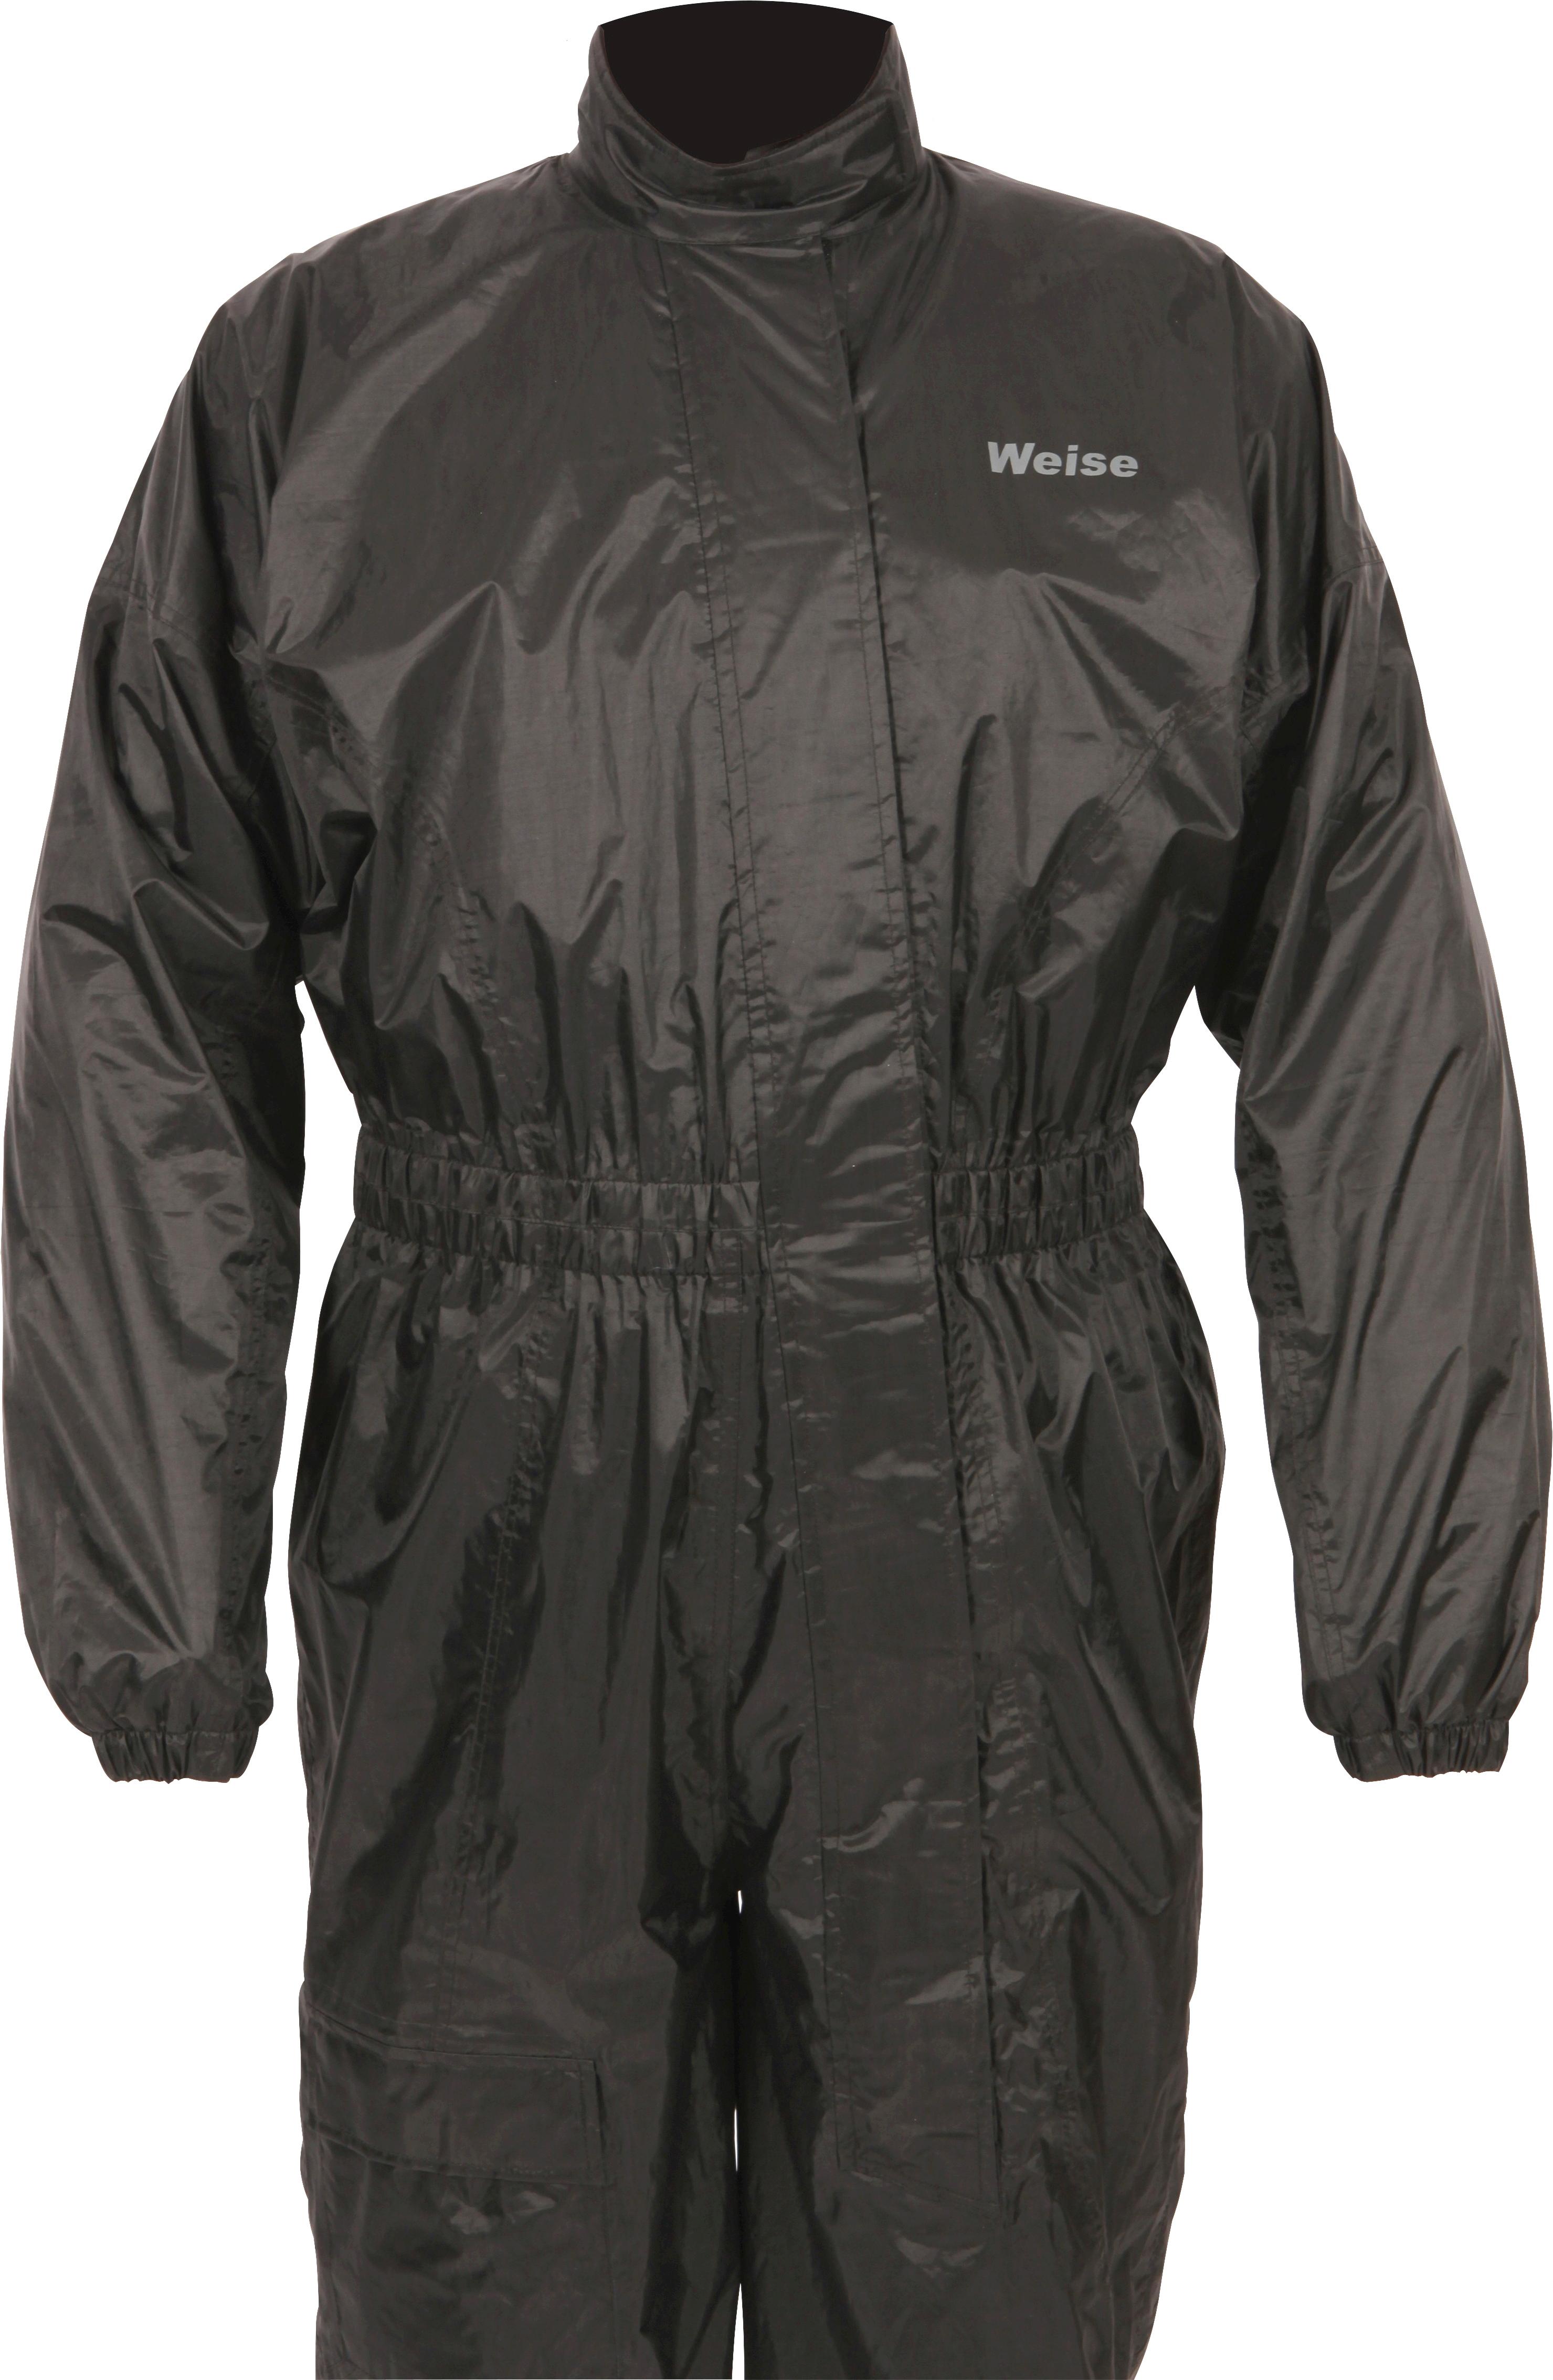 Weise Tempest Oversuit Xl